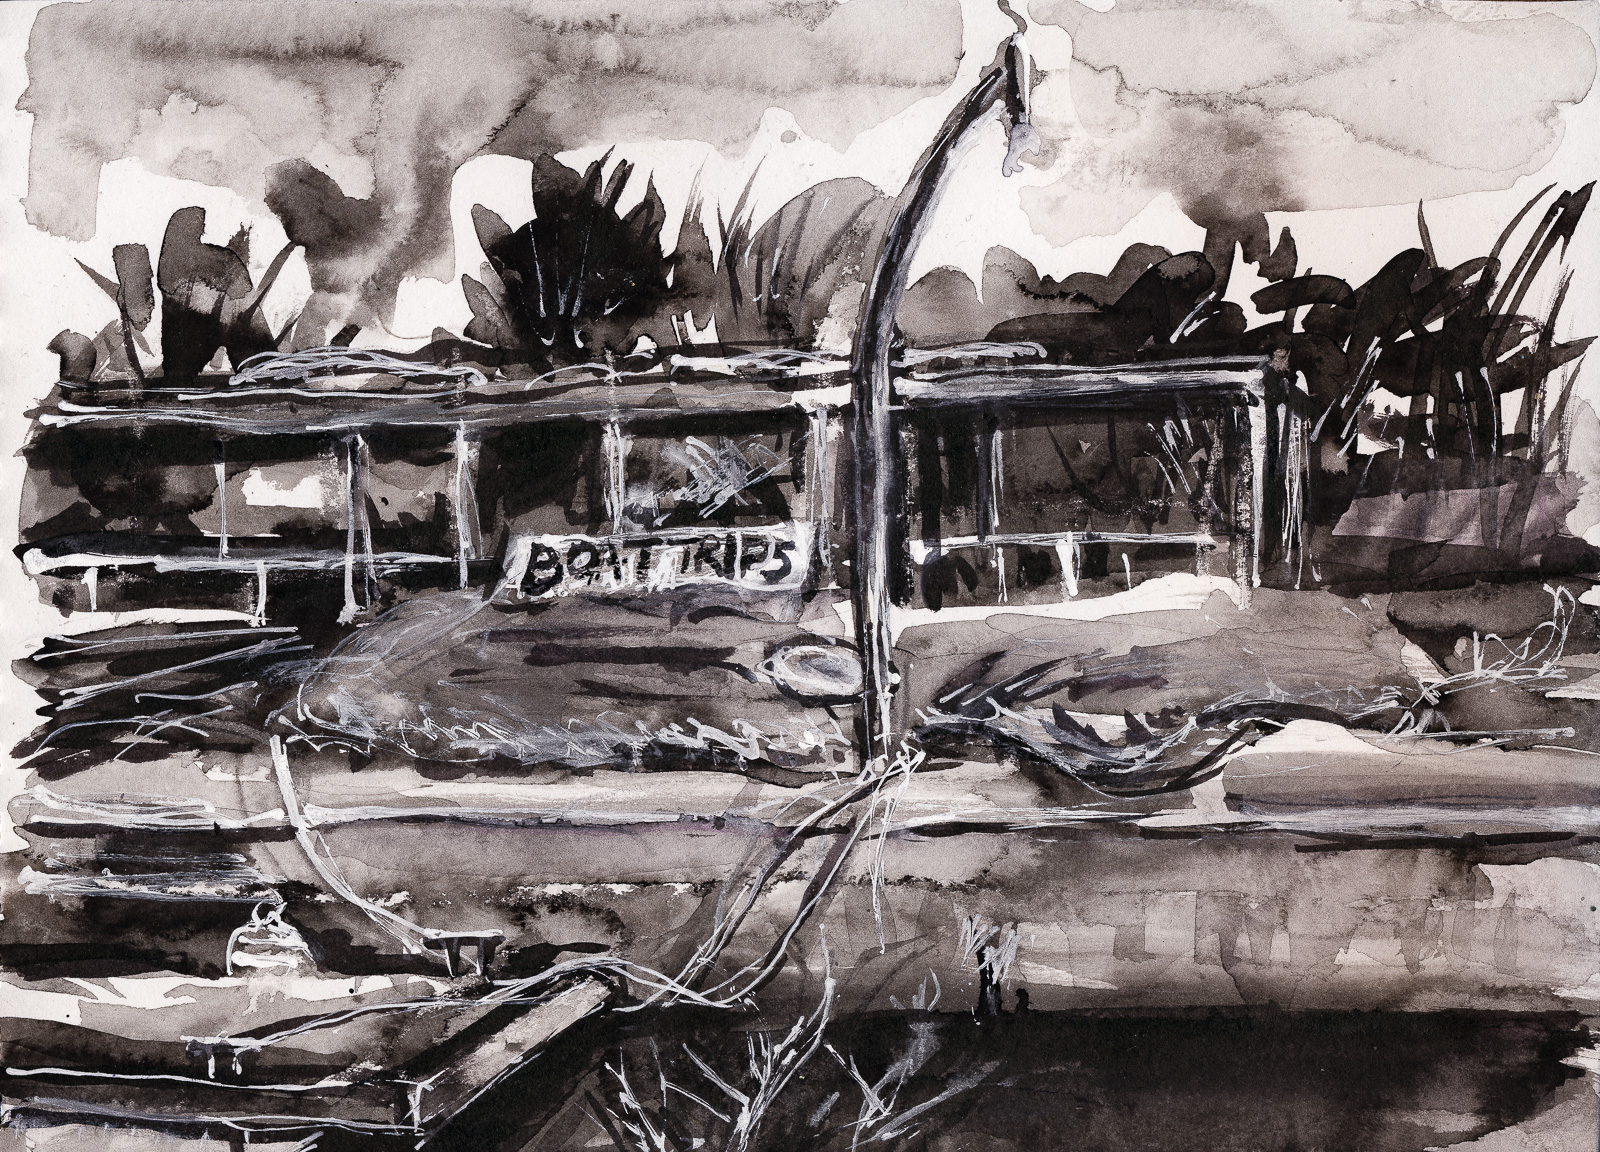 Boat Trips (Night/River series), Fountain Pen, Brush and ink, white ink pump marker and Wash, A4 Flat White Sketchbook